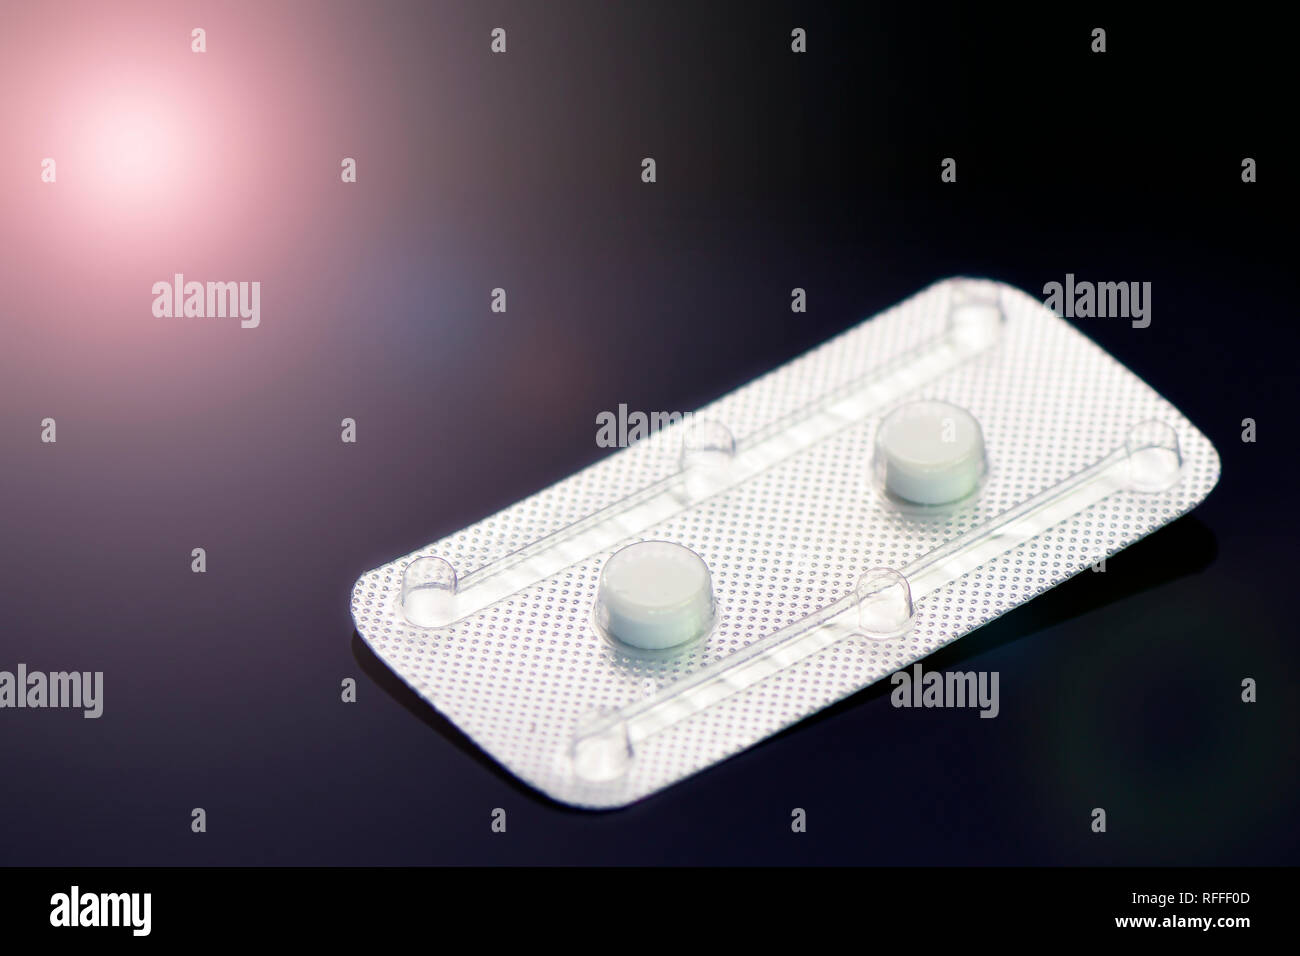 Emergency Contraceptive Pills, Morning-After Pills or Post-coital Pills on Dark Background. Stock Photo